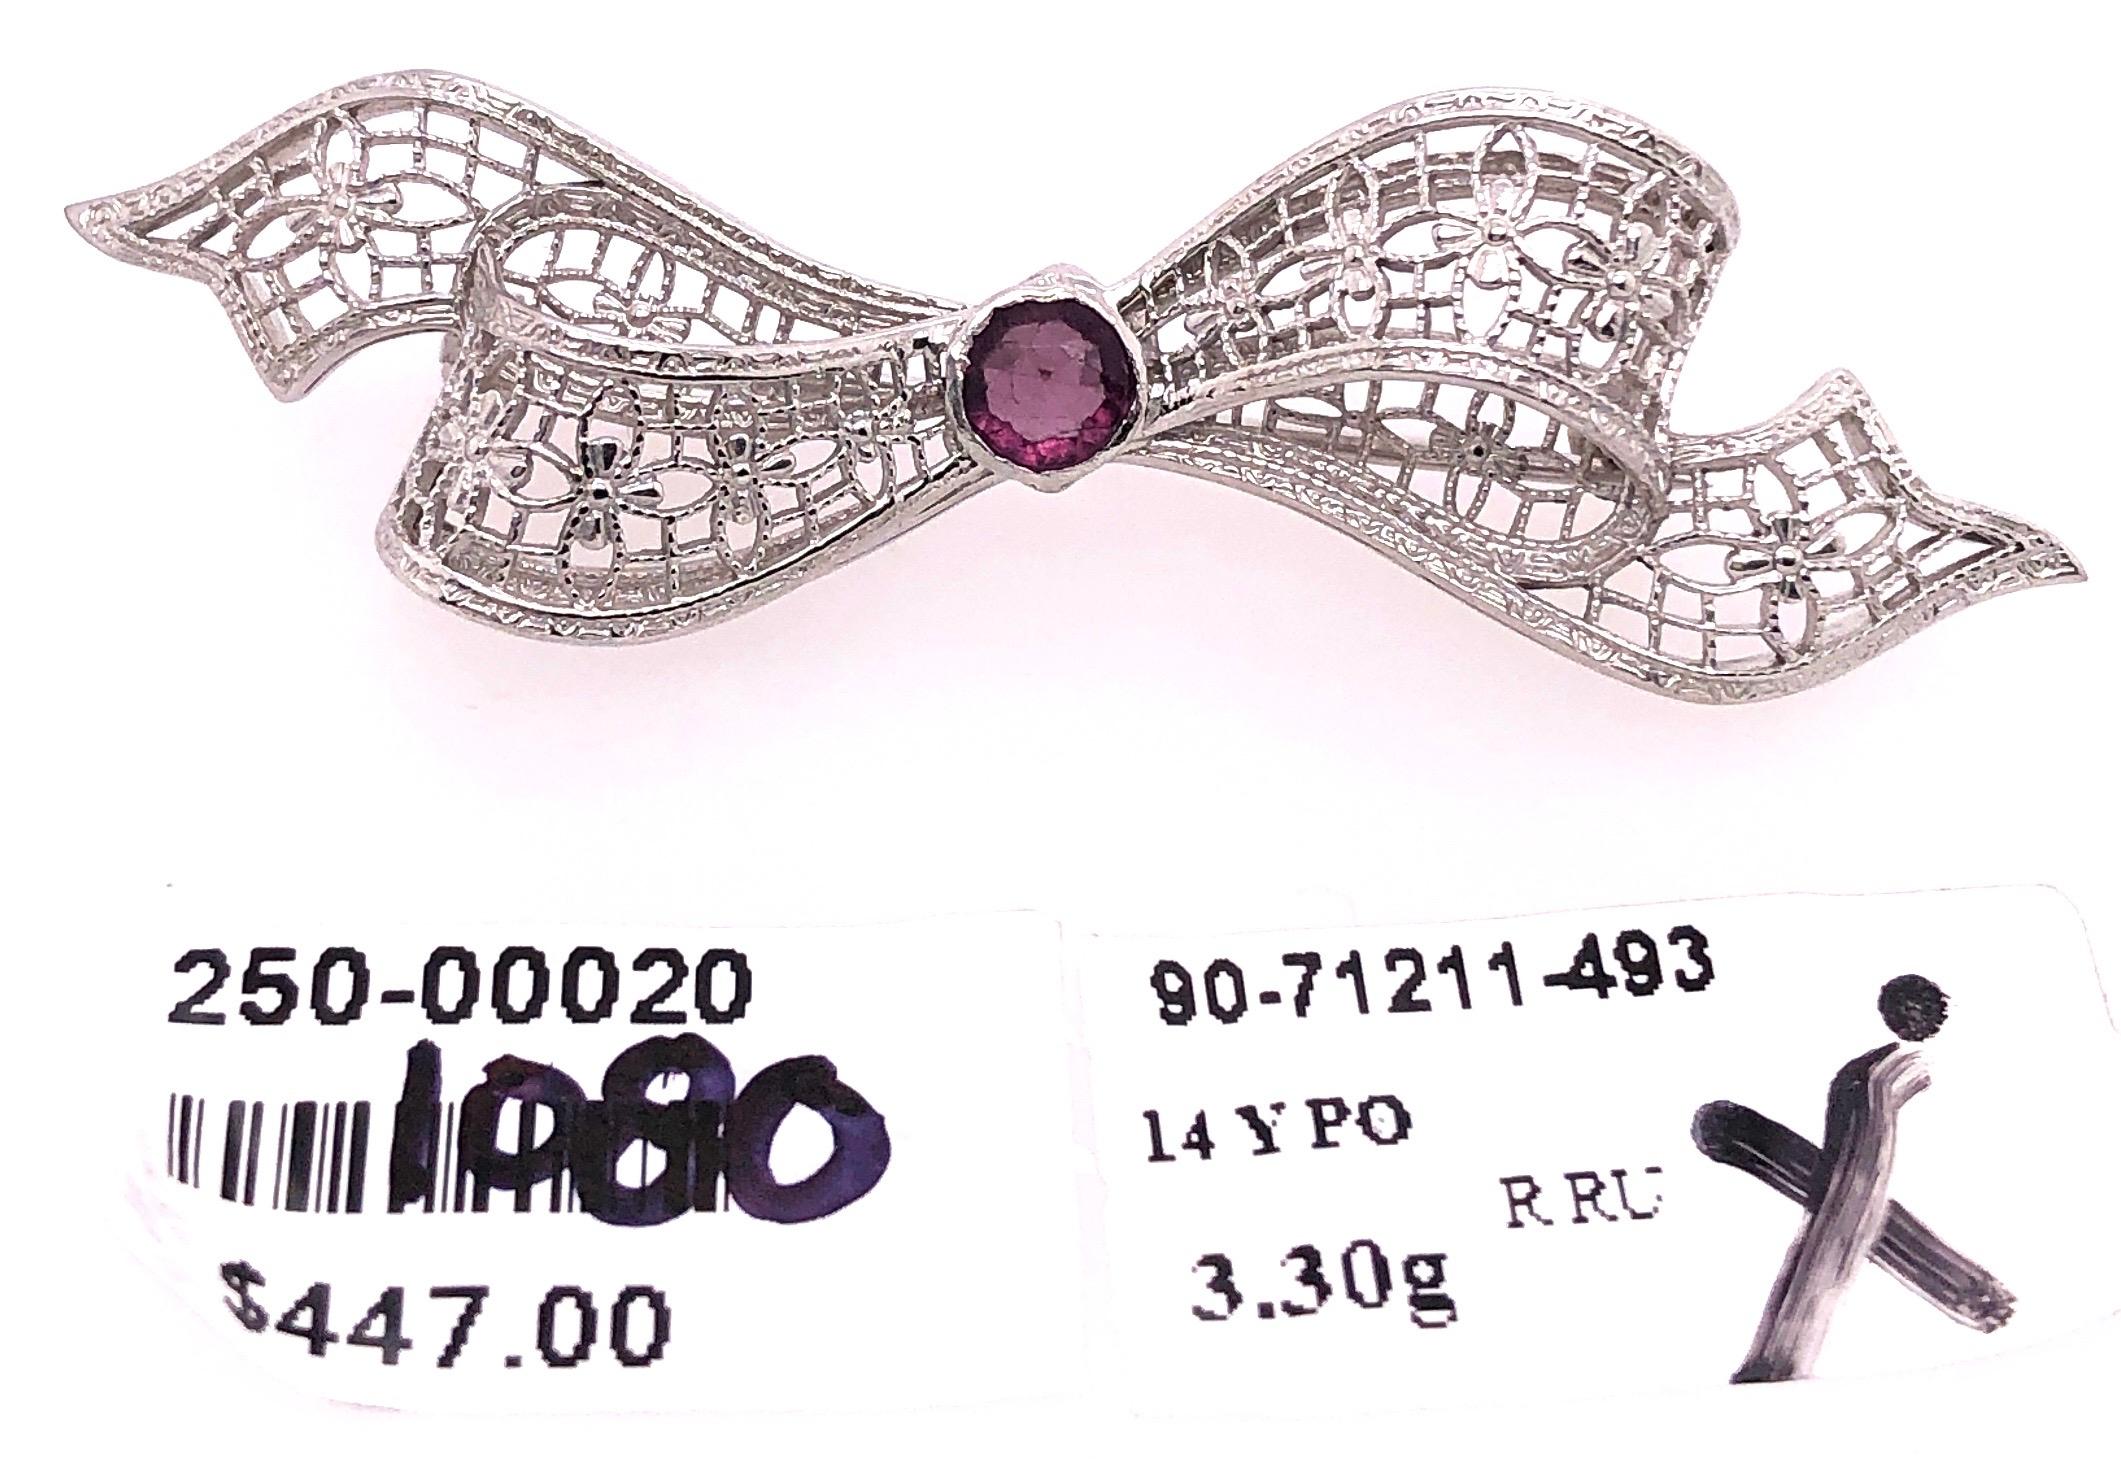 Women's or Men's 14 Karat White Gold Brooch Filigree Bow Design with Amethyst Center Stone Pin For Sale